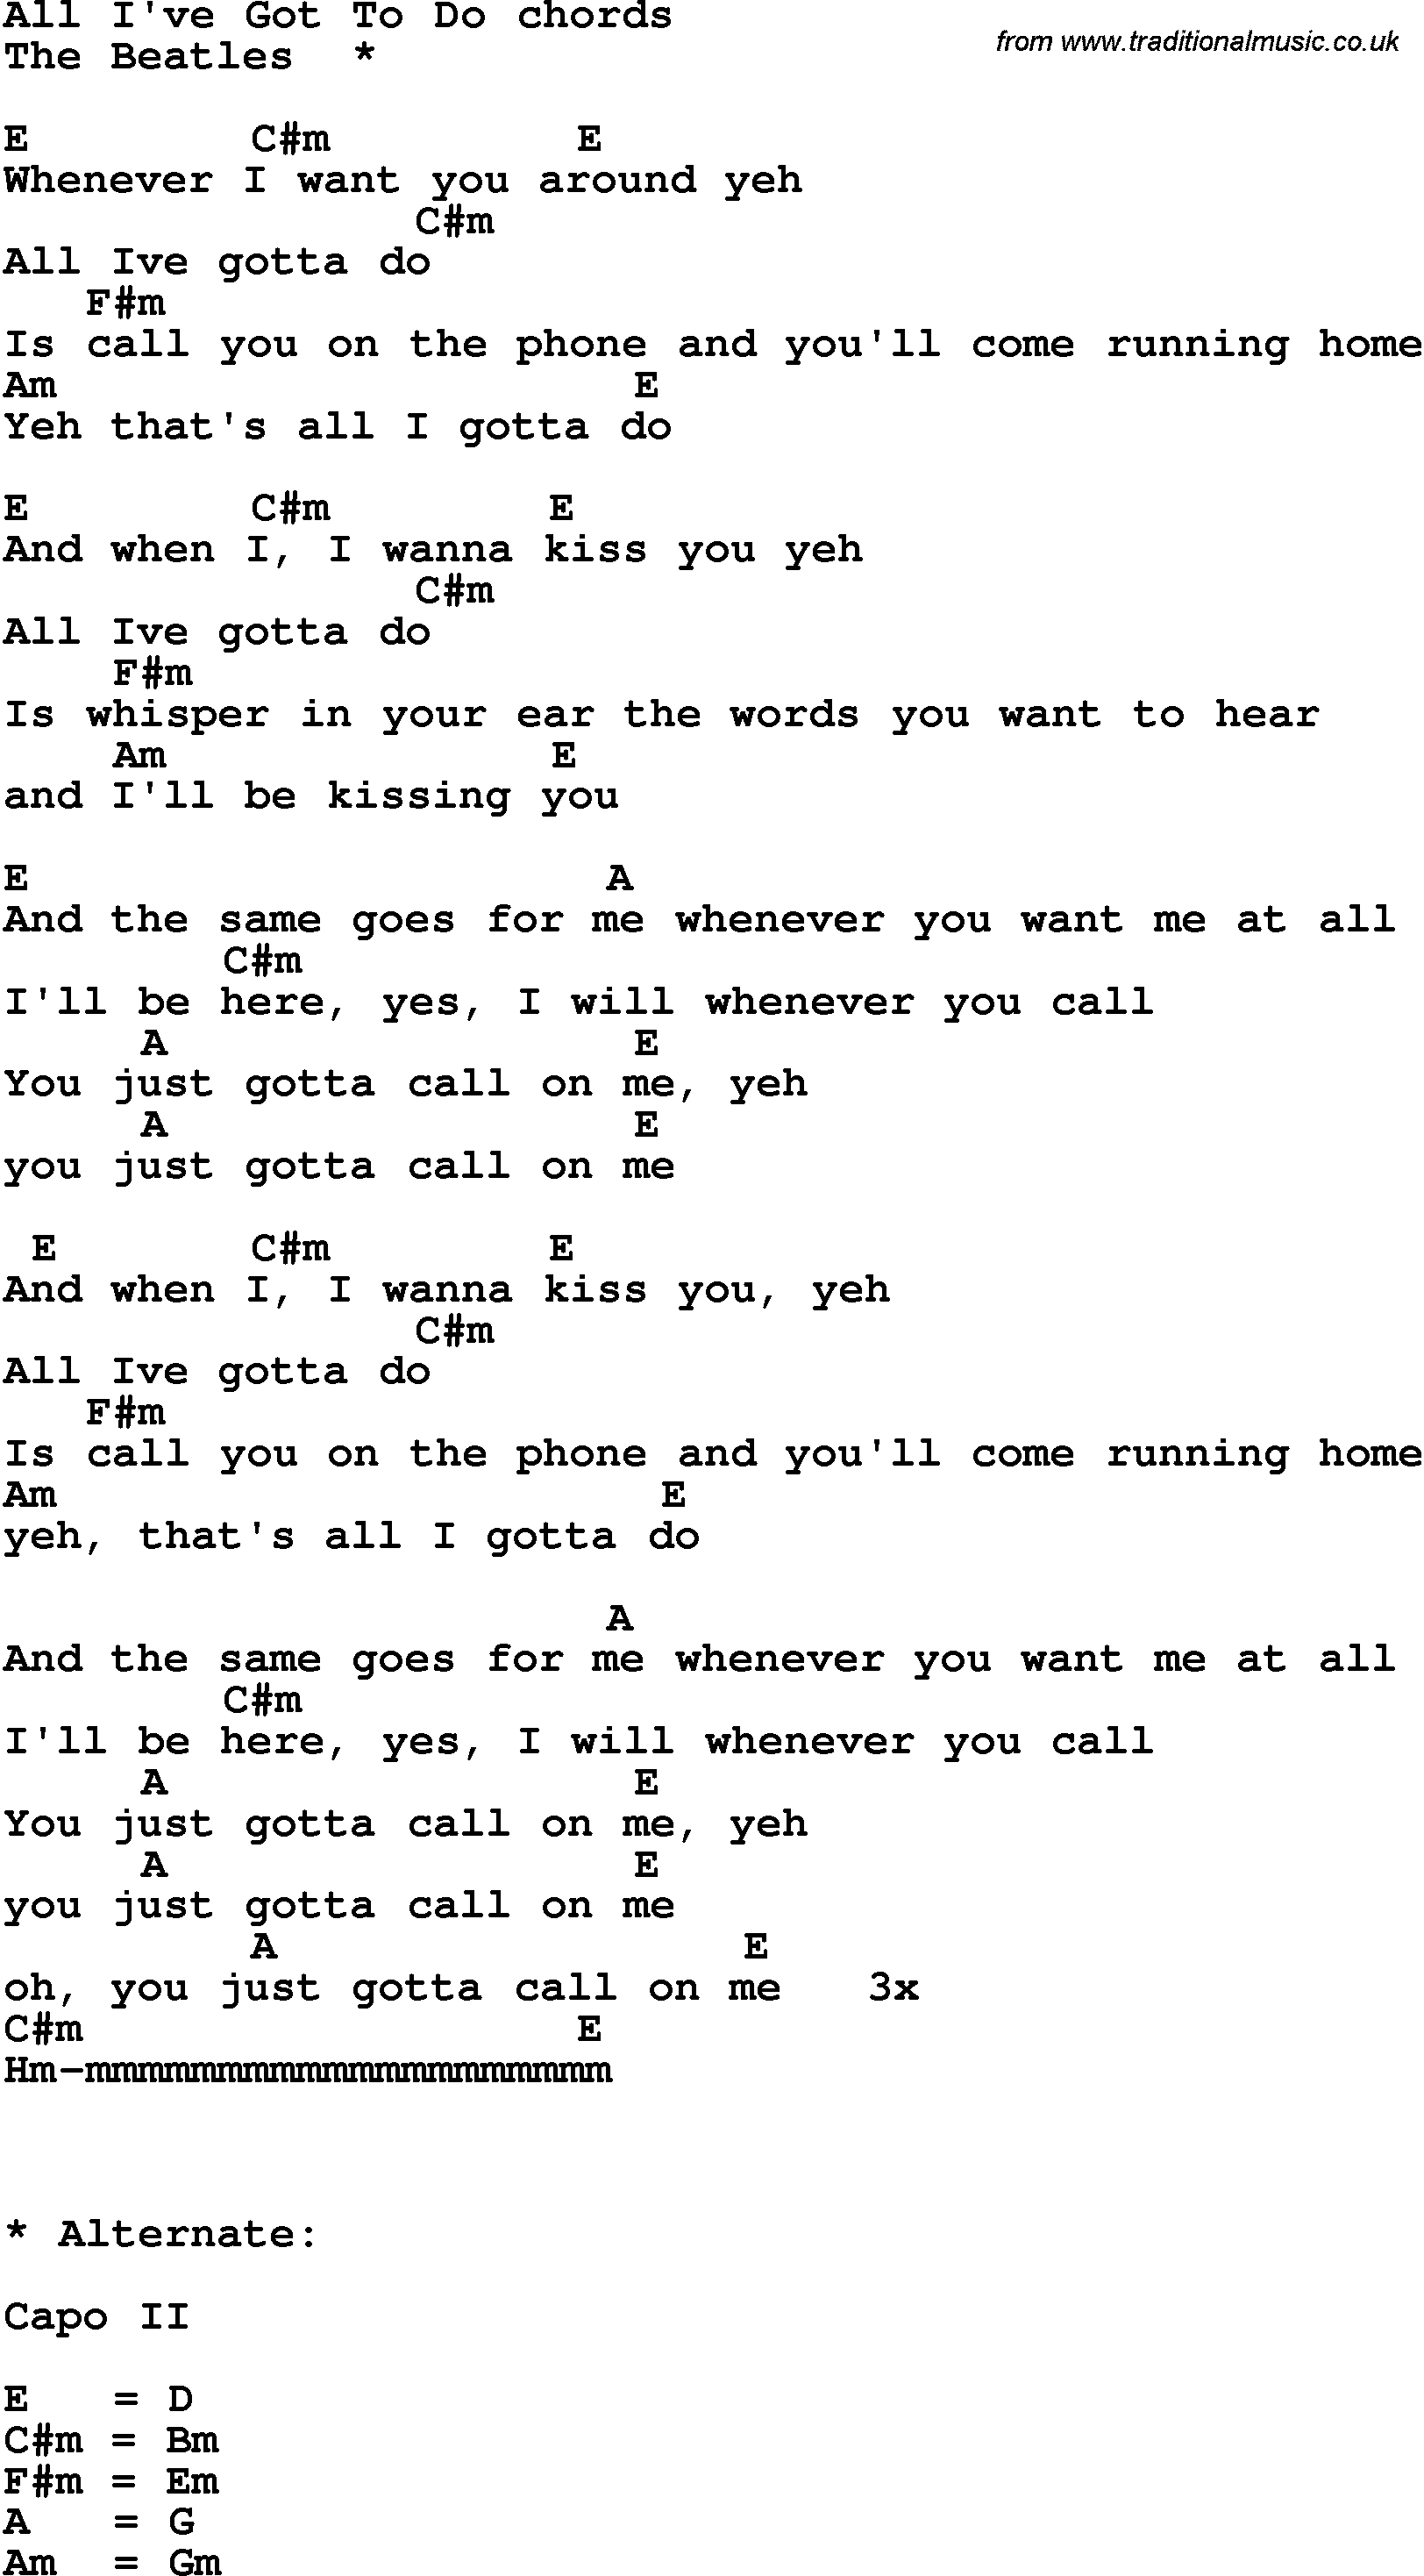 All I Want Chords Song Lyrics With Guitar Chords For All I Got To Do